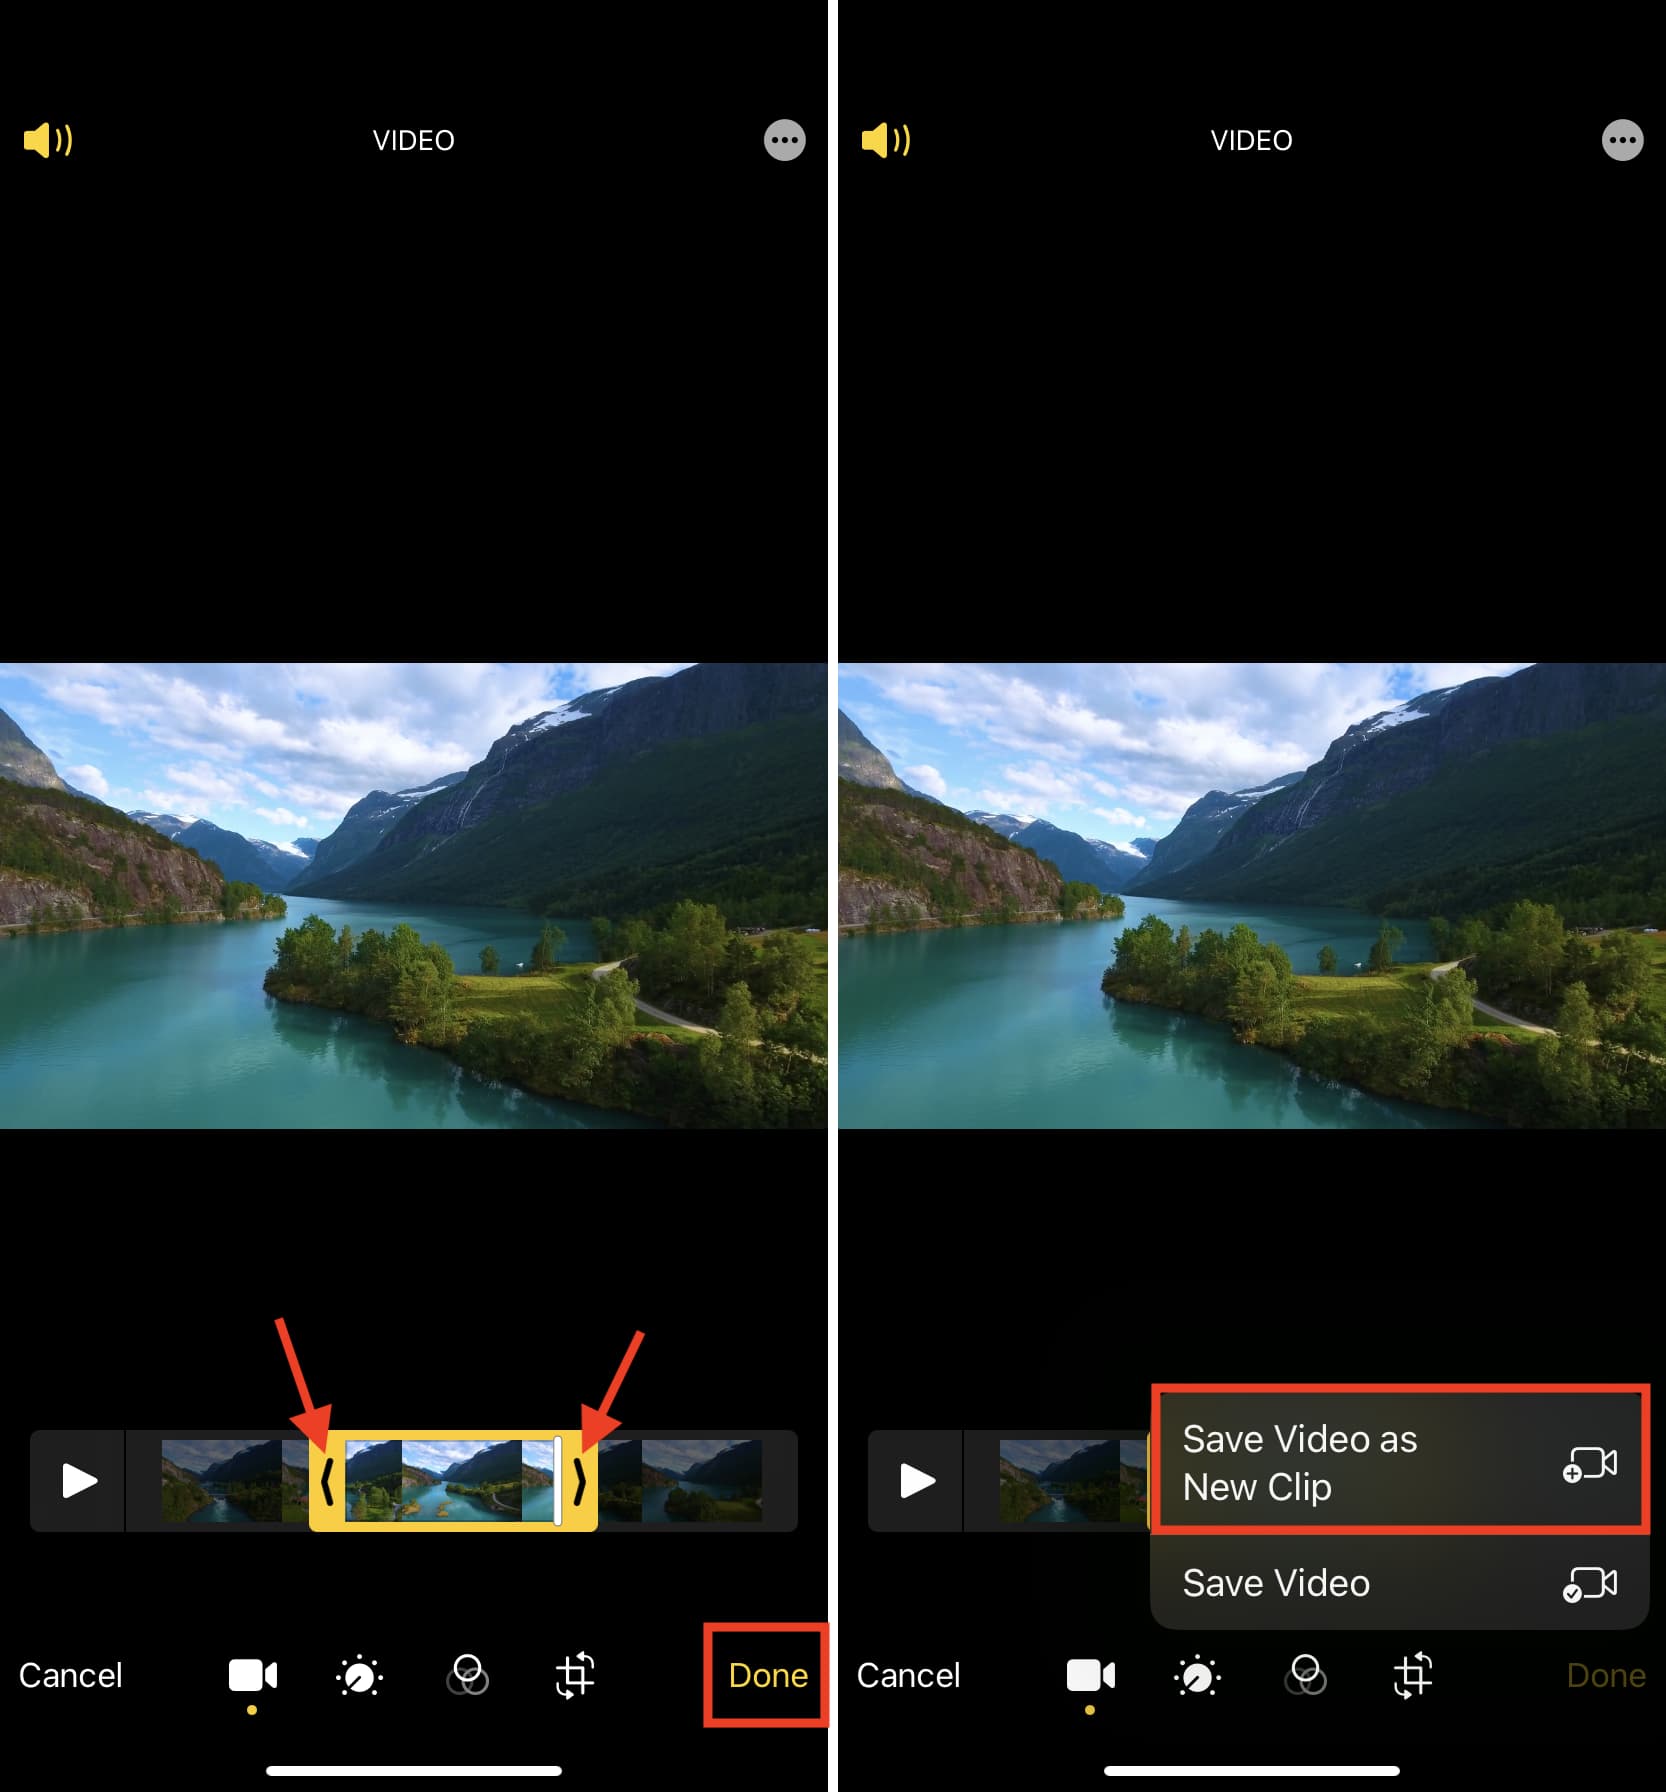 Crop videos and keep only their meaningful part to save space on iPhone